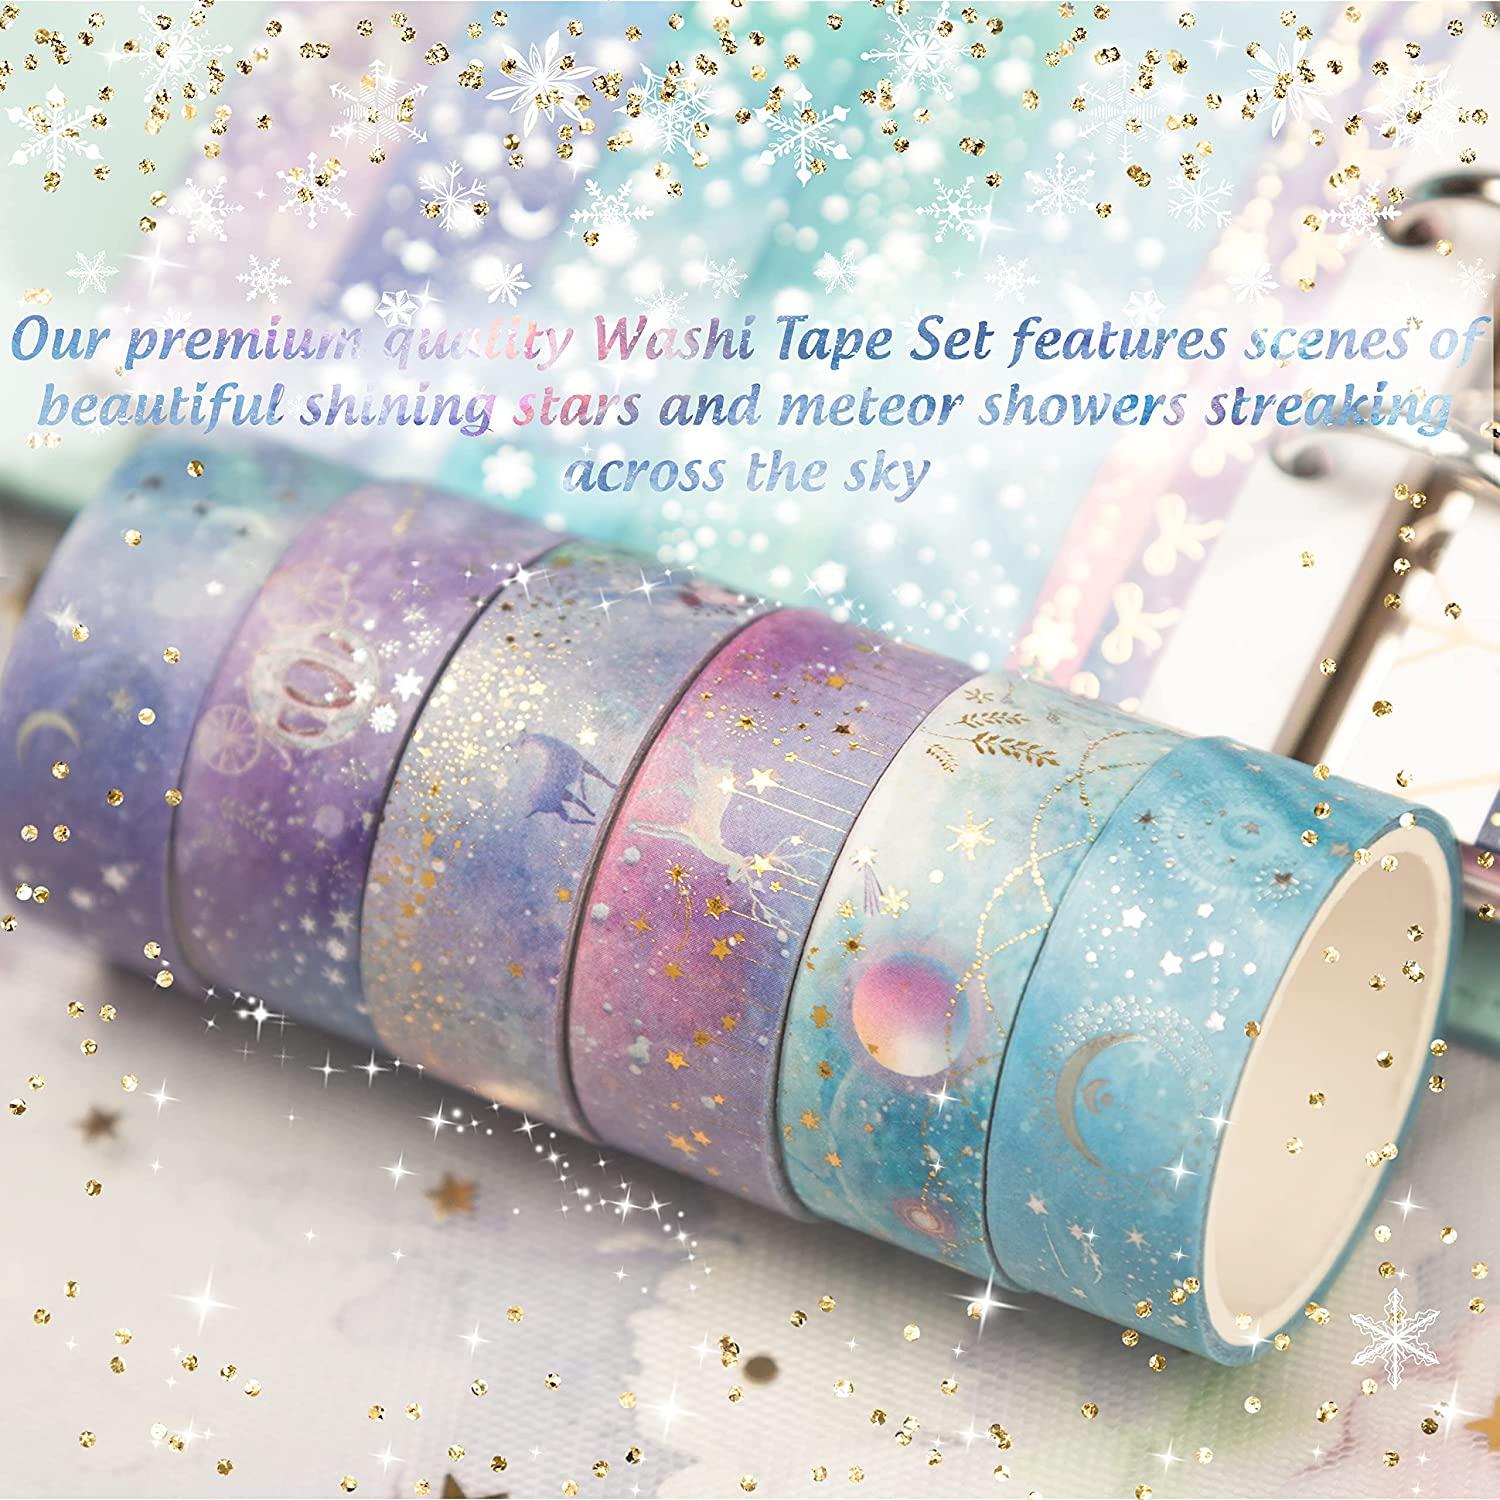 OHMZPERE 50 Rolls Washi Tape Set, Gold Foil Galaxy Washi Tape for Journaling,Scrapbooking  Supplies. Design Upgrading Decor and Washi Tape for DIY Crafts, Gift Wrap,  Party Decorations